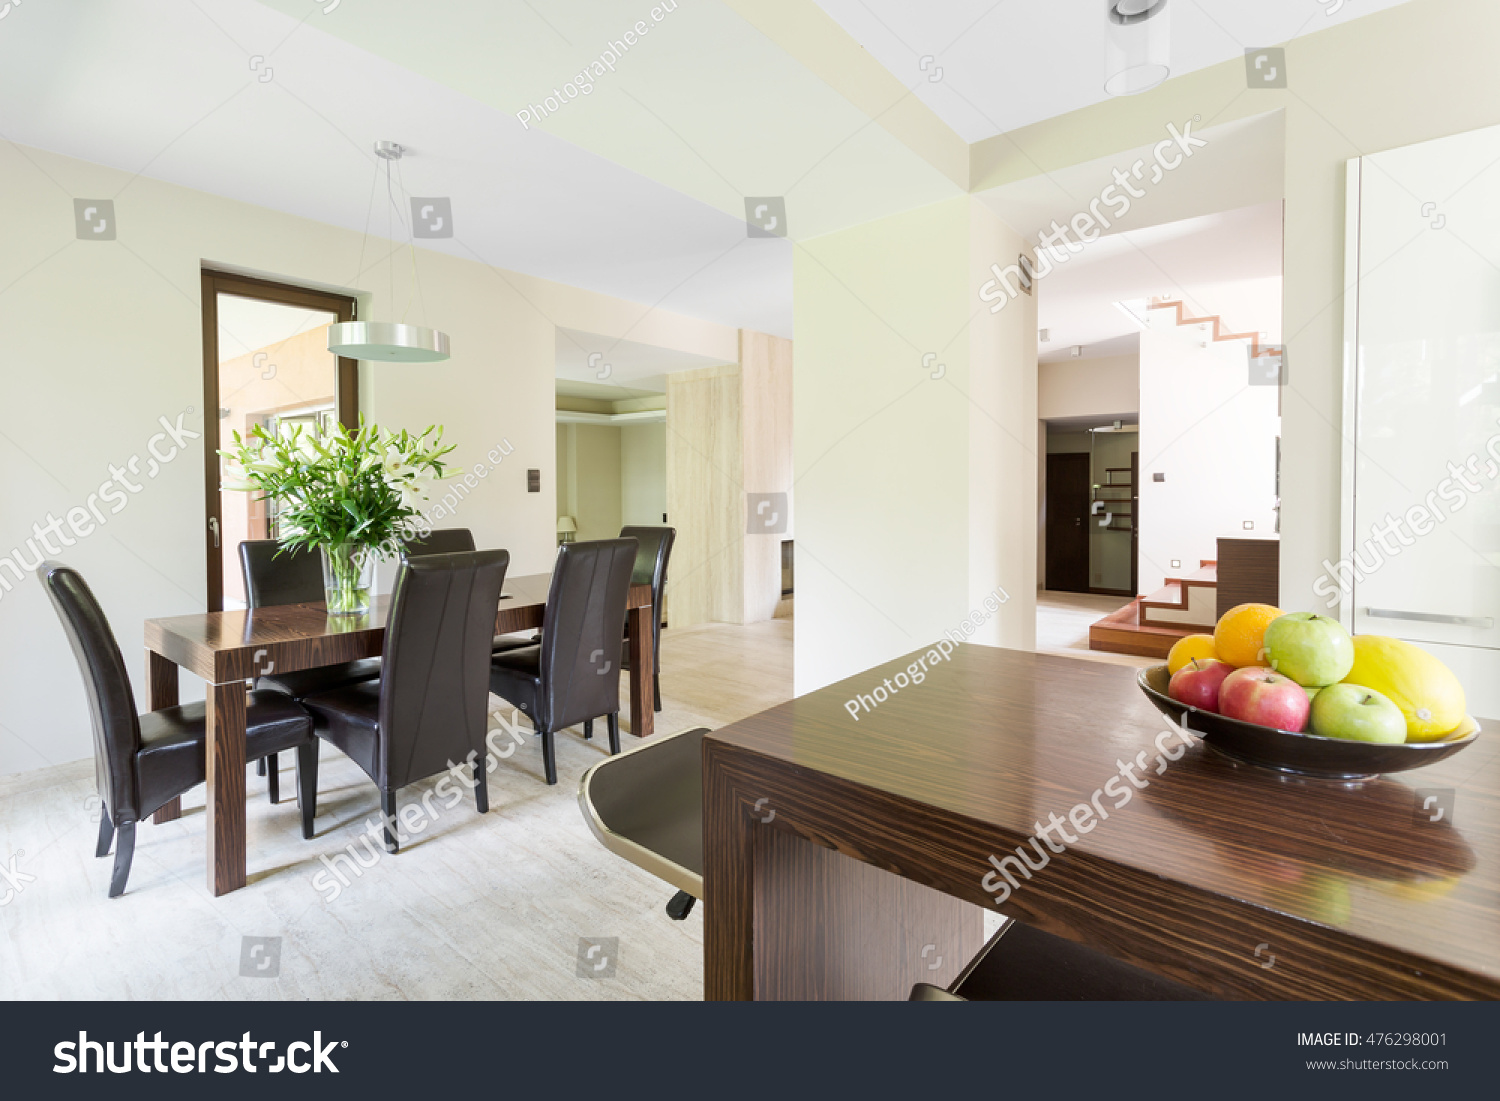 Imposing dining room in a large house with travertine floor #476298001